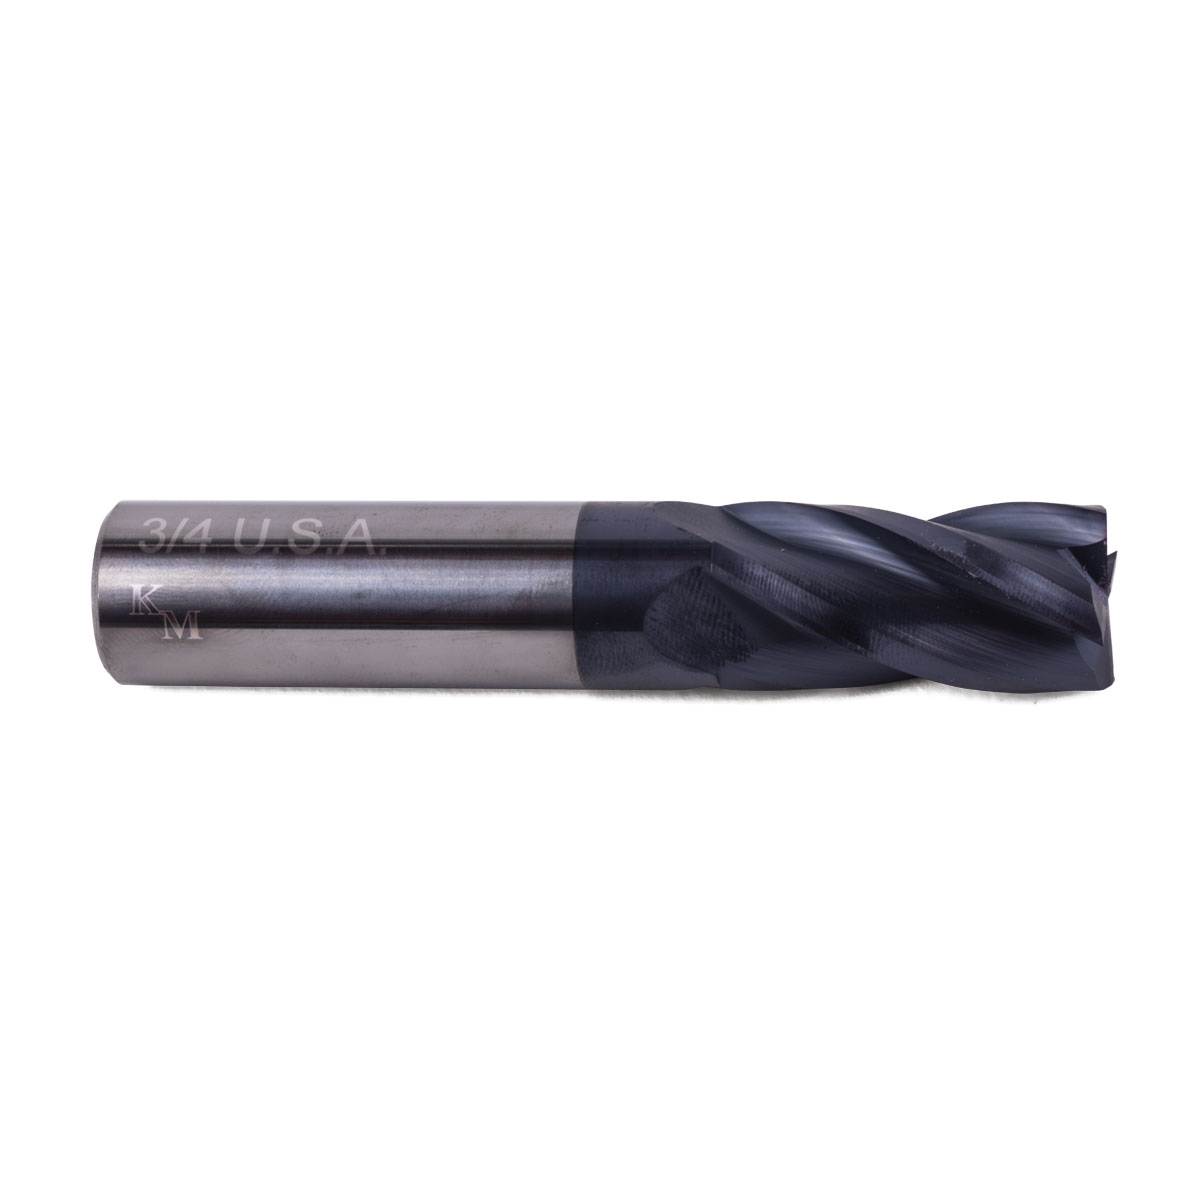 7/16 AlTiN Coated End Mill